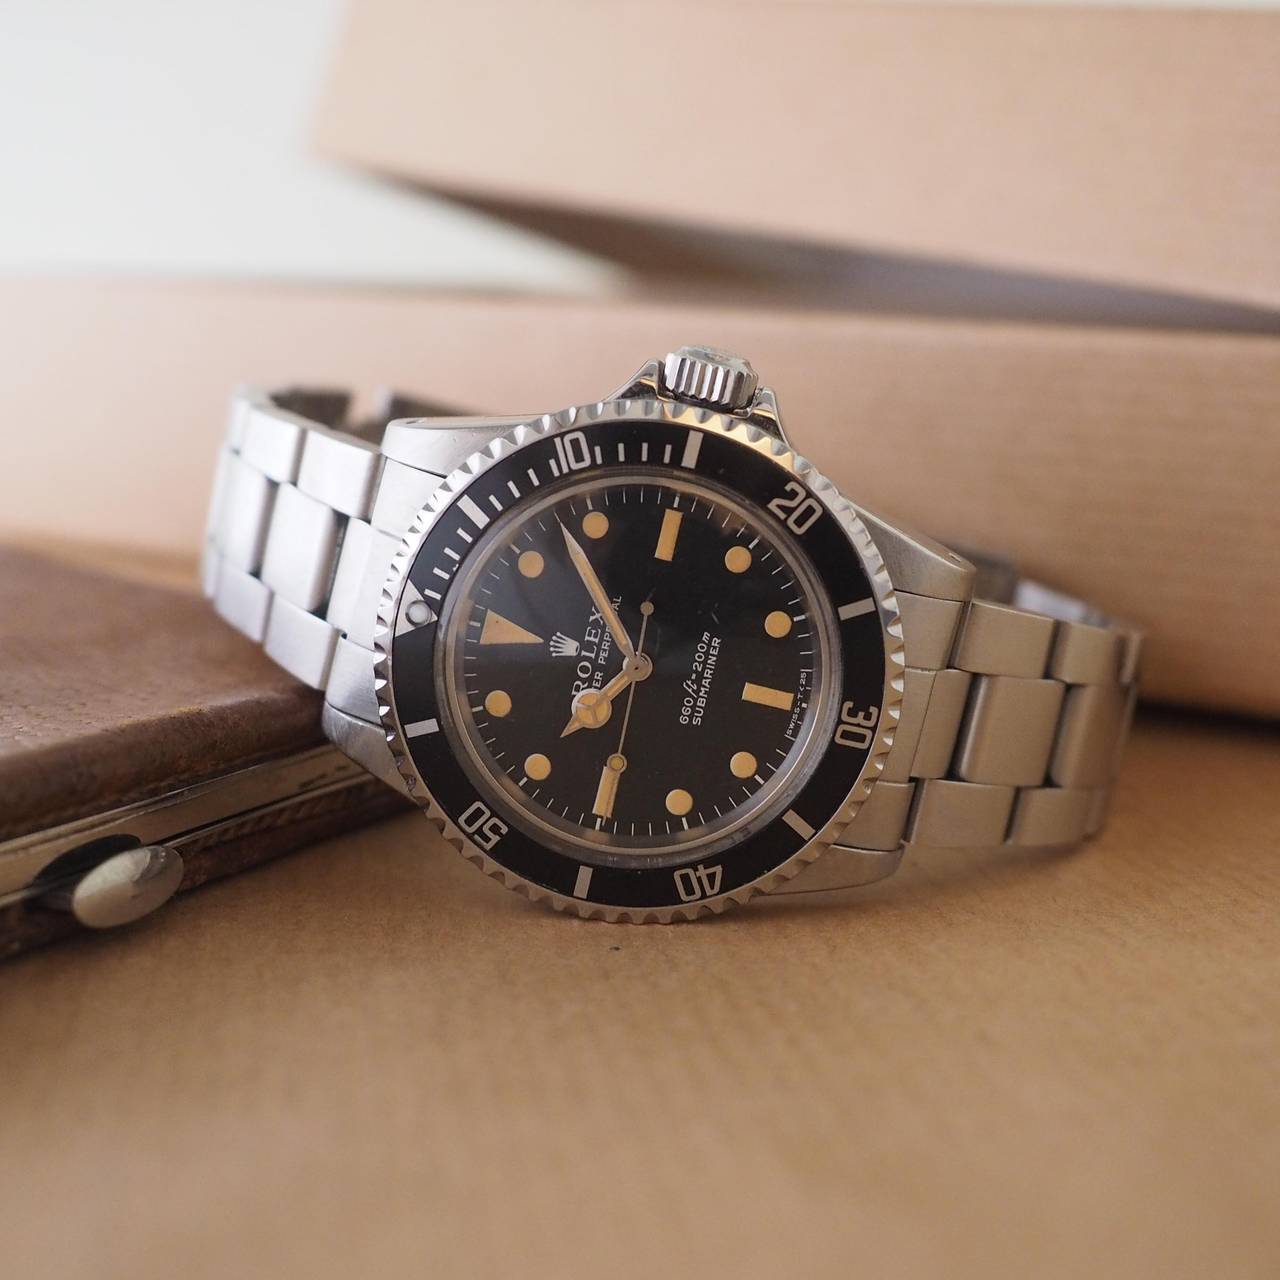 Rolex 
Rolex Submariner 
Ref. 5513
Serial Number: 583....
Steel Case
Black Matt Dial with Patina
Original Rolex Bracelet Ref. 93150 and Leather Strap
Automatic Winding
Diameter: 40mm
Year: About 1978